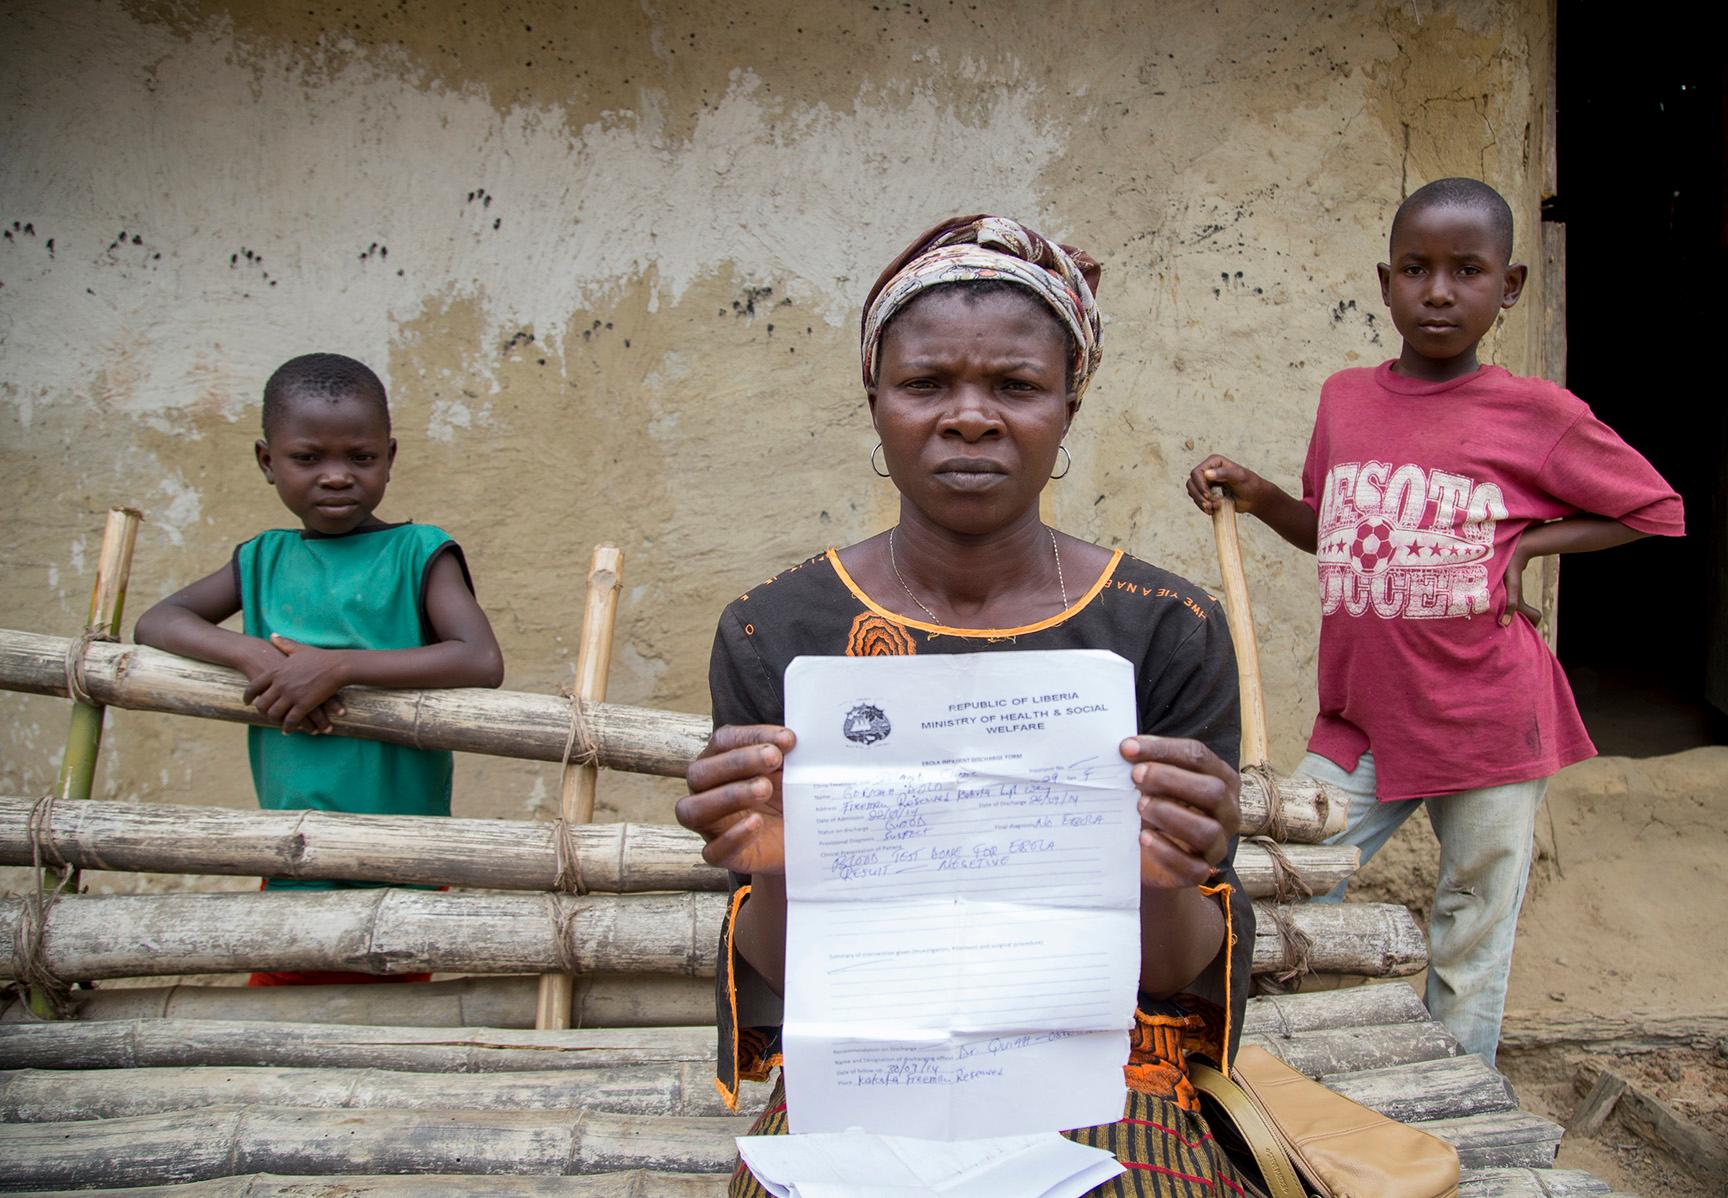 Ebola Survivor Gorma Dolo, holds an ebola free health certificate at her house in Freeman Reserve, Liberia.  